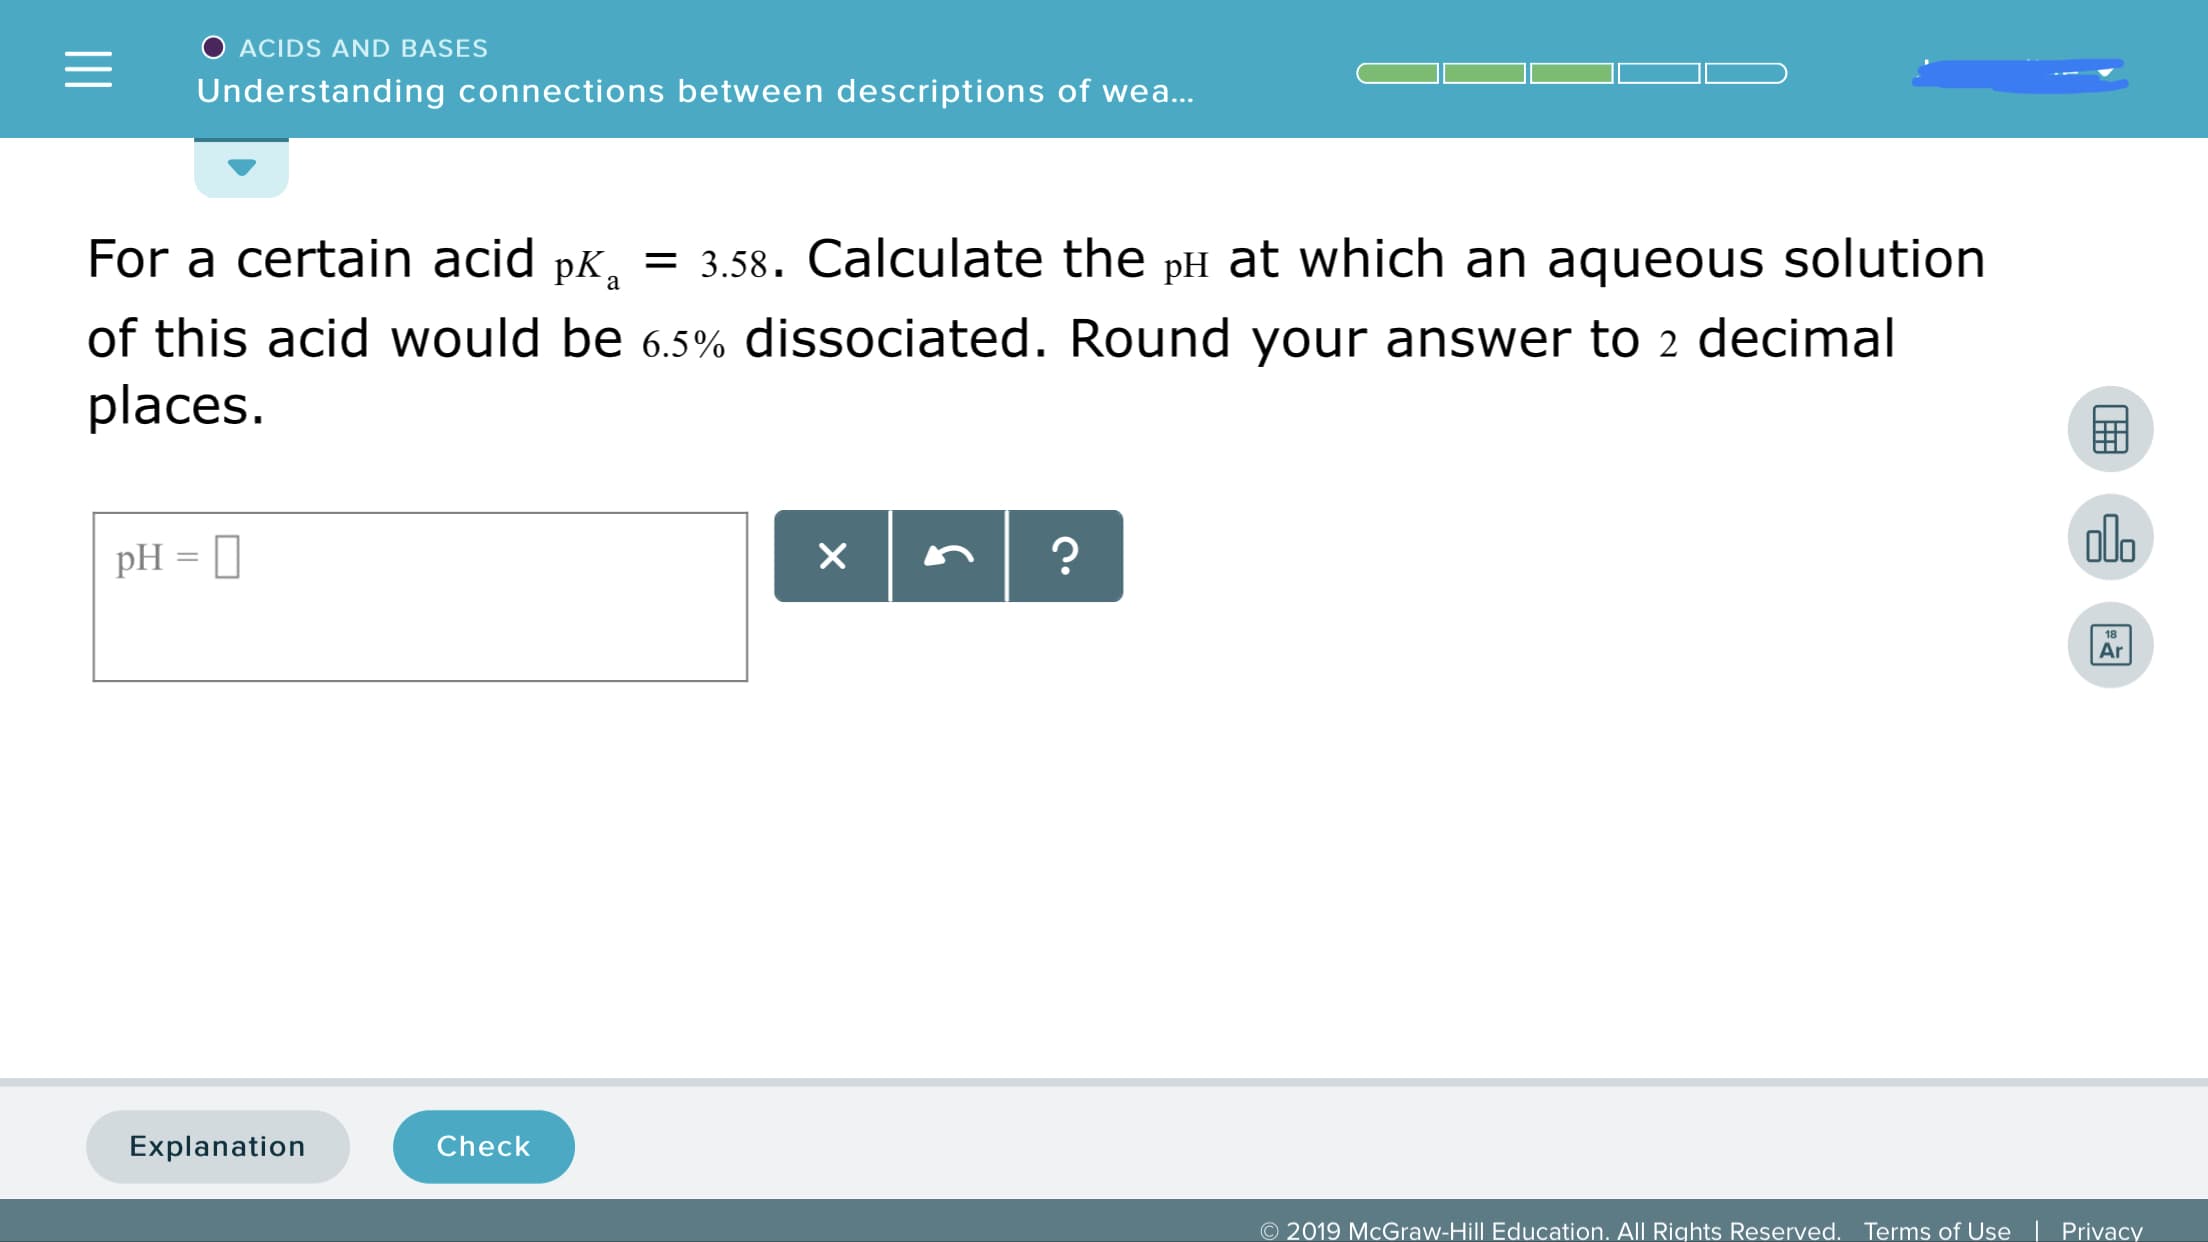 ACIDS AND BASES
Understanding connections between descriptions of wea
For a certain acid pK, 3.58. Calculate the pH at which an aqueous solution
of this acid would be 6.5% dissociated. Round your answer to 2 decimal
places
ala
18
Ar
Explanation
Check
© 2019 McGraw-Hill Education. All Rights Reserved.
Terms of Use
|
Privacy
